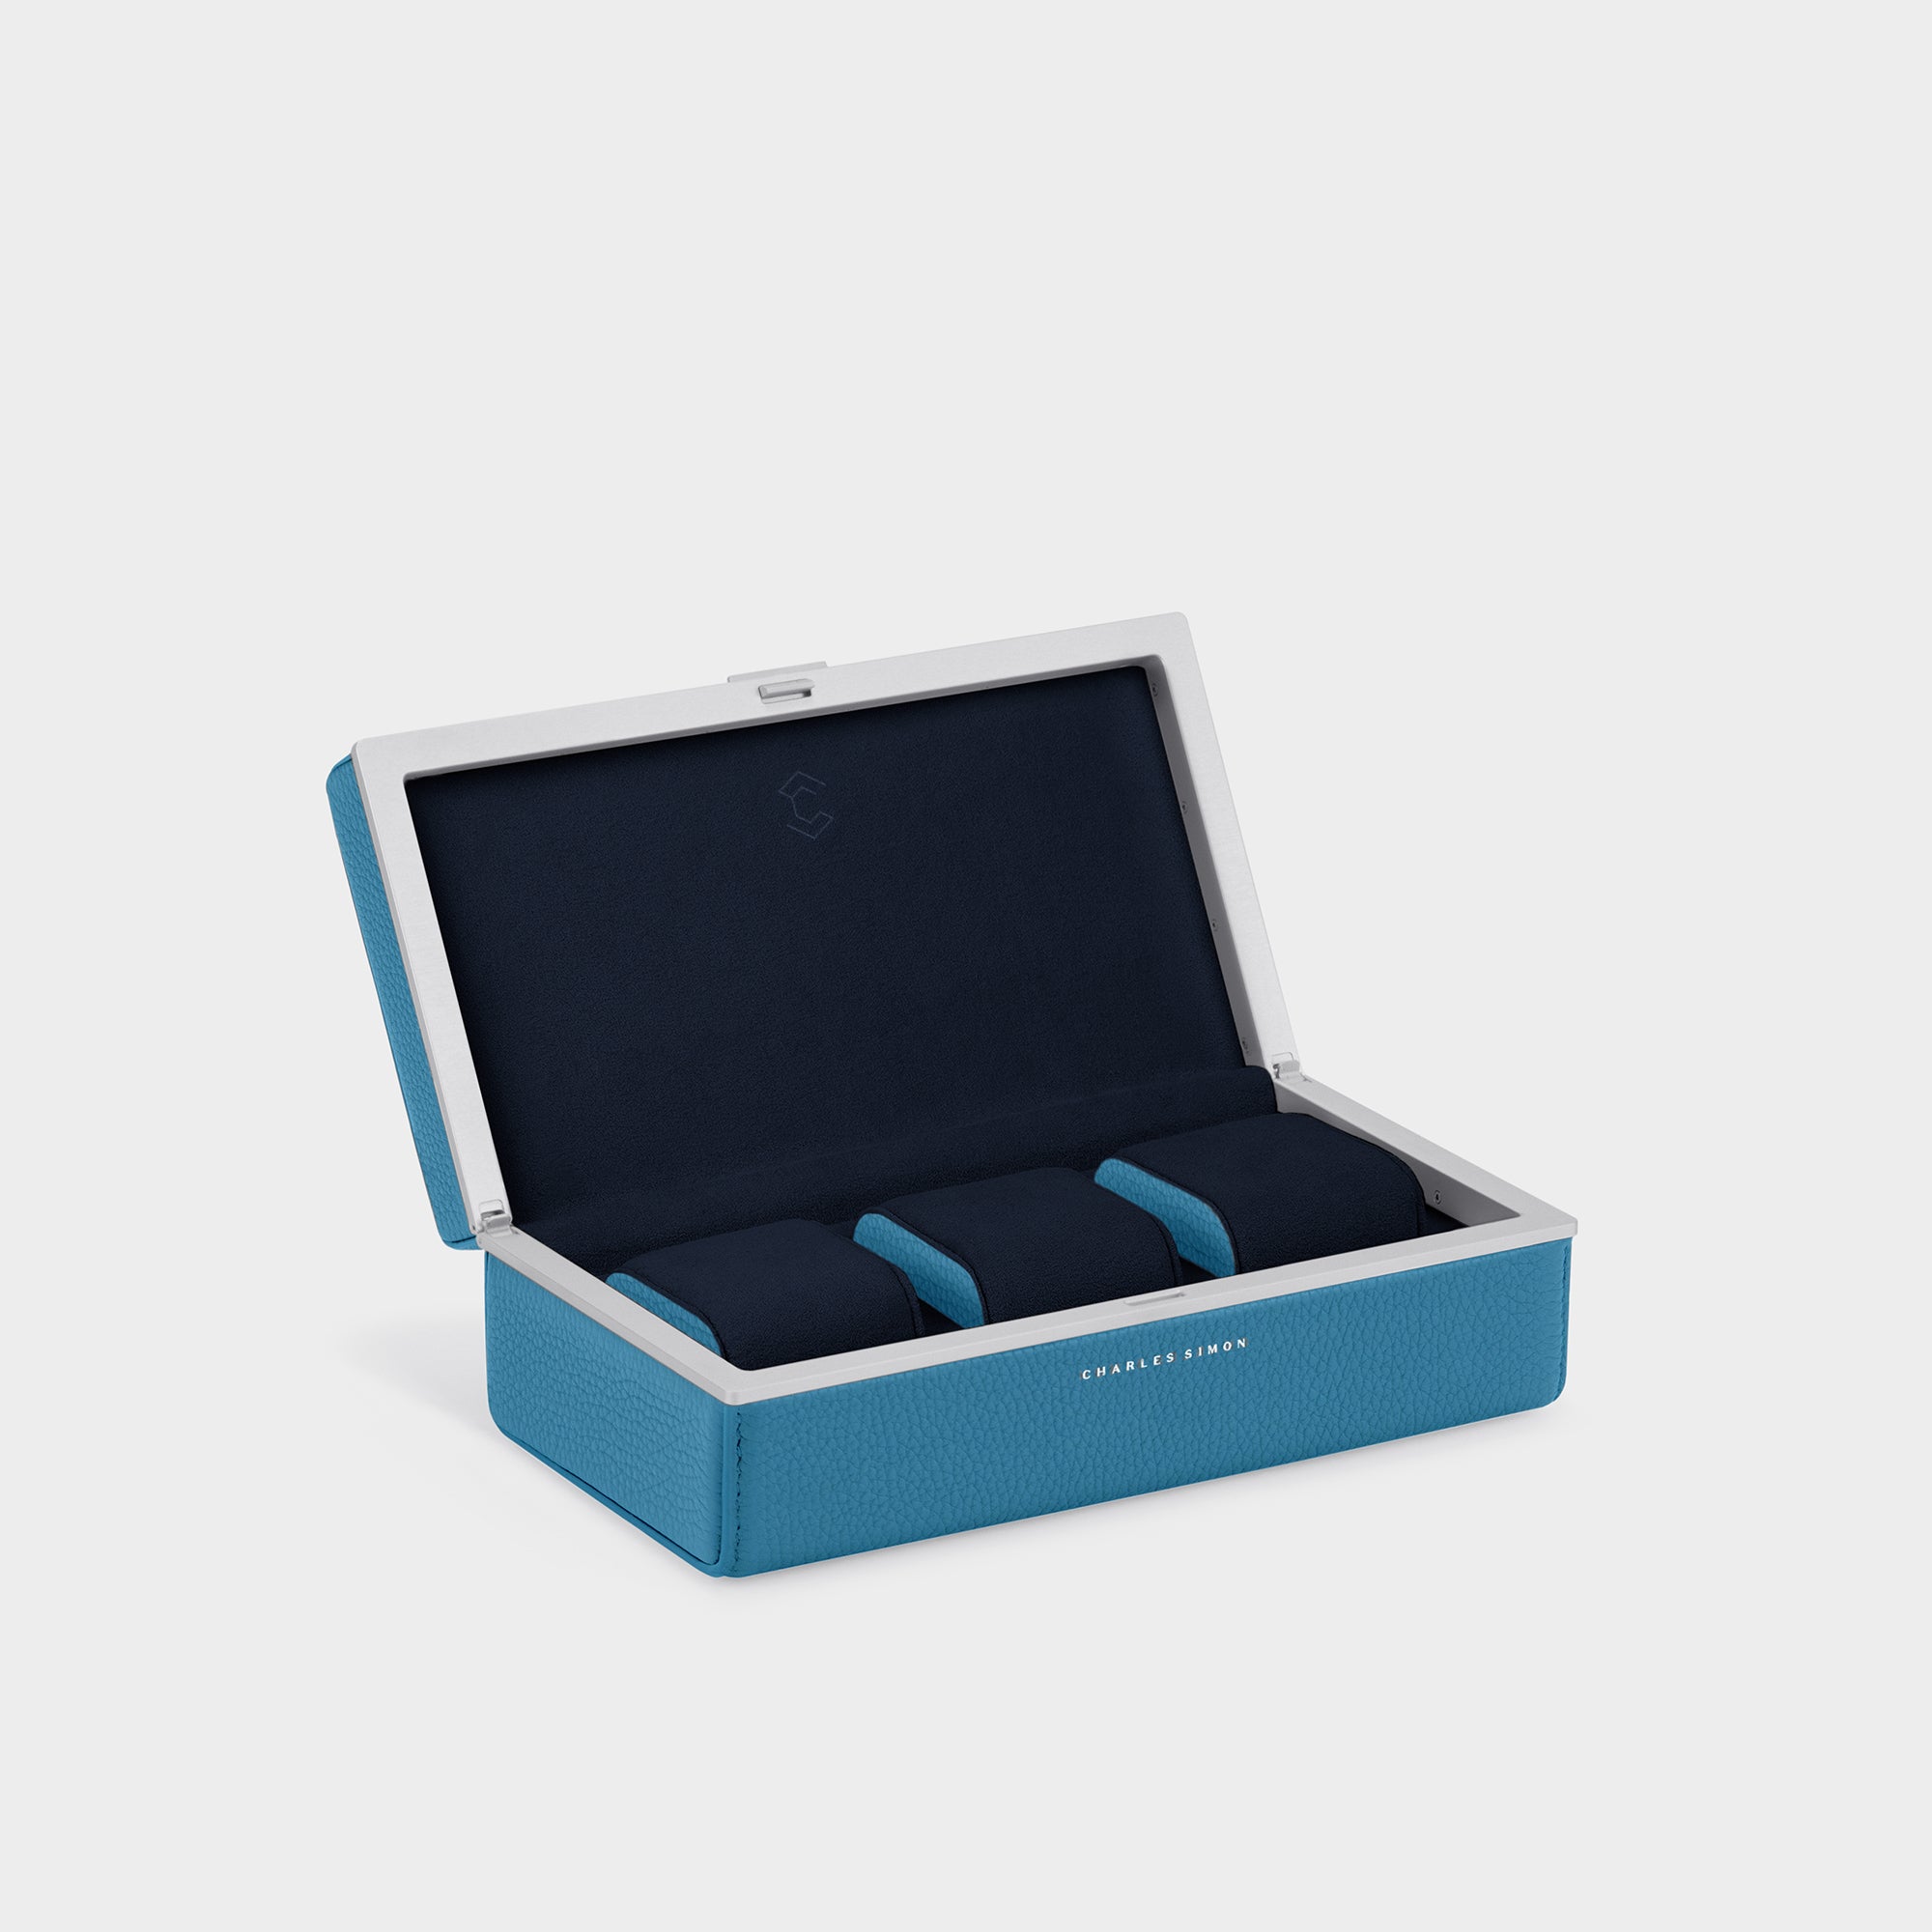 Charles Simon Eaton watch case for 3 watches. Handmade from sky blue premium French leather , deep blue Alcantara and anodized aluminum. Featuring colorful sky blue leather accents on the sides of the three removable Alcantara cushions